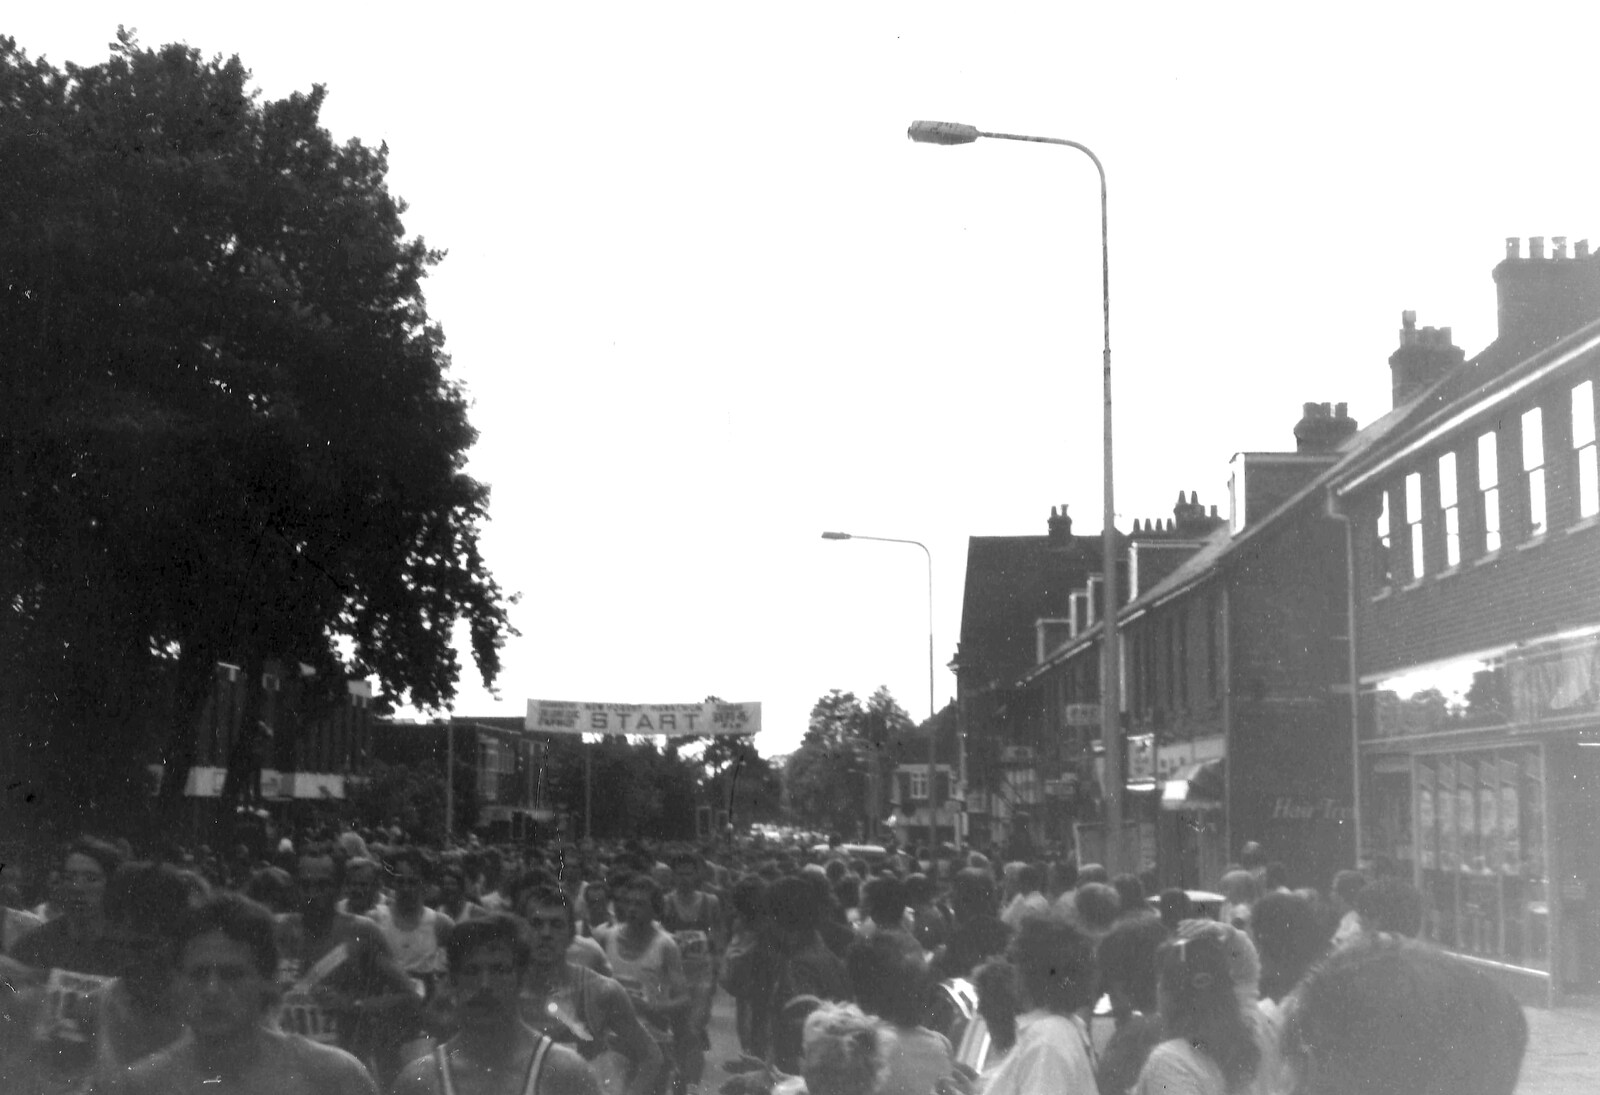 Marathon runners on Station Road from The New Forest Marathon and Other Randomness, New Milton, Hampshire - 15th September 1985